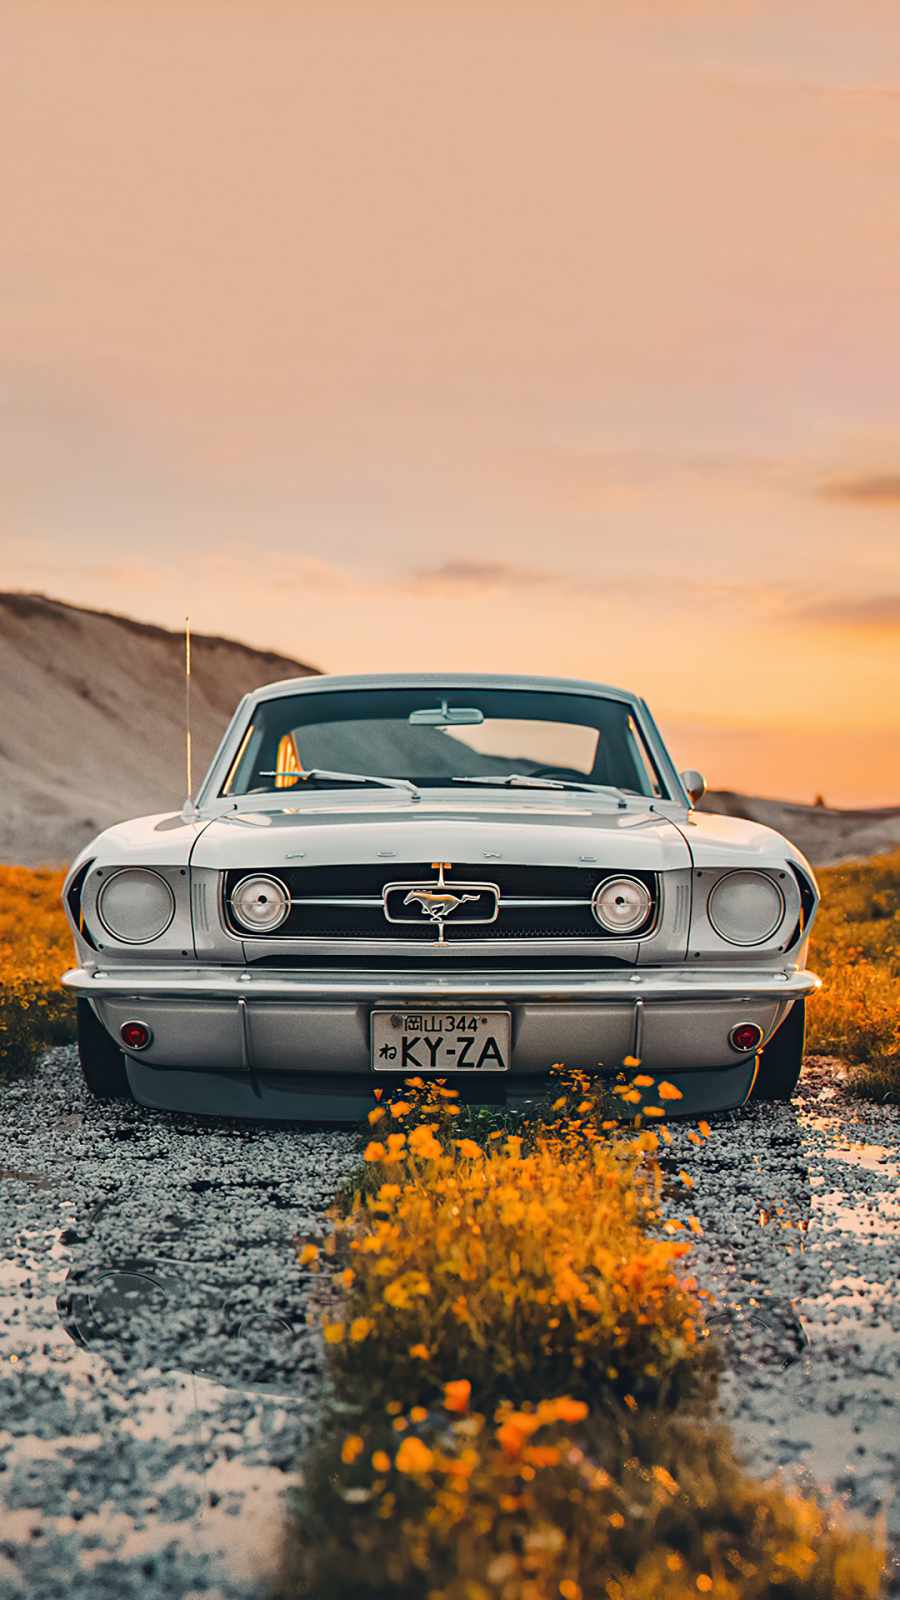 Ford Logo Iphone Wallpapers